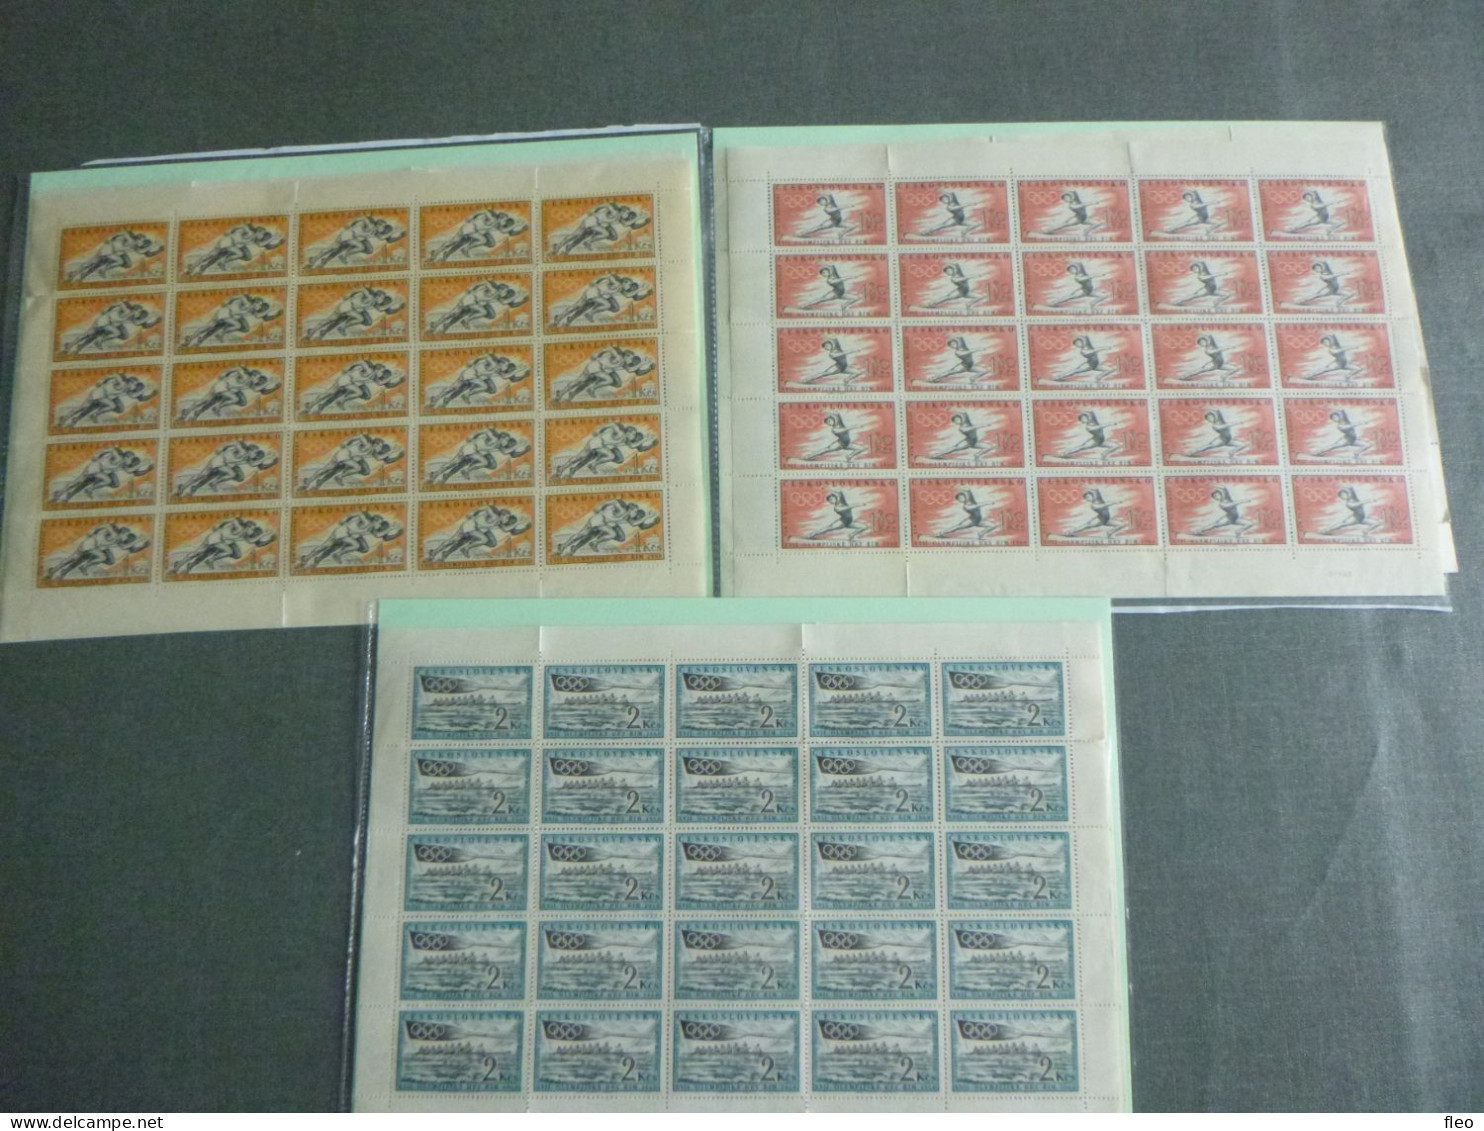 Czechoslovakia / Stamps (1960) 25 X Serie Mi 1206-1208 Sc 967-969 MNH** : XVII. Olympic Games 1960 Rome - Unused Stamps